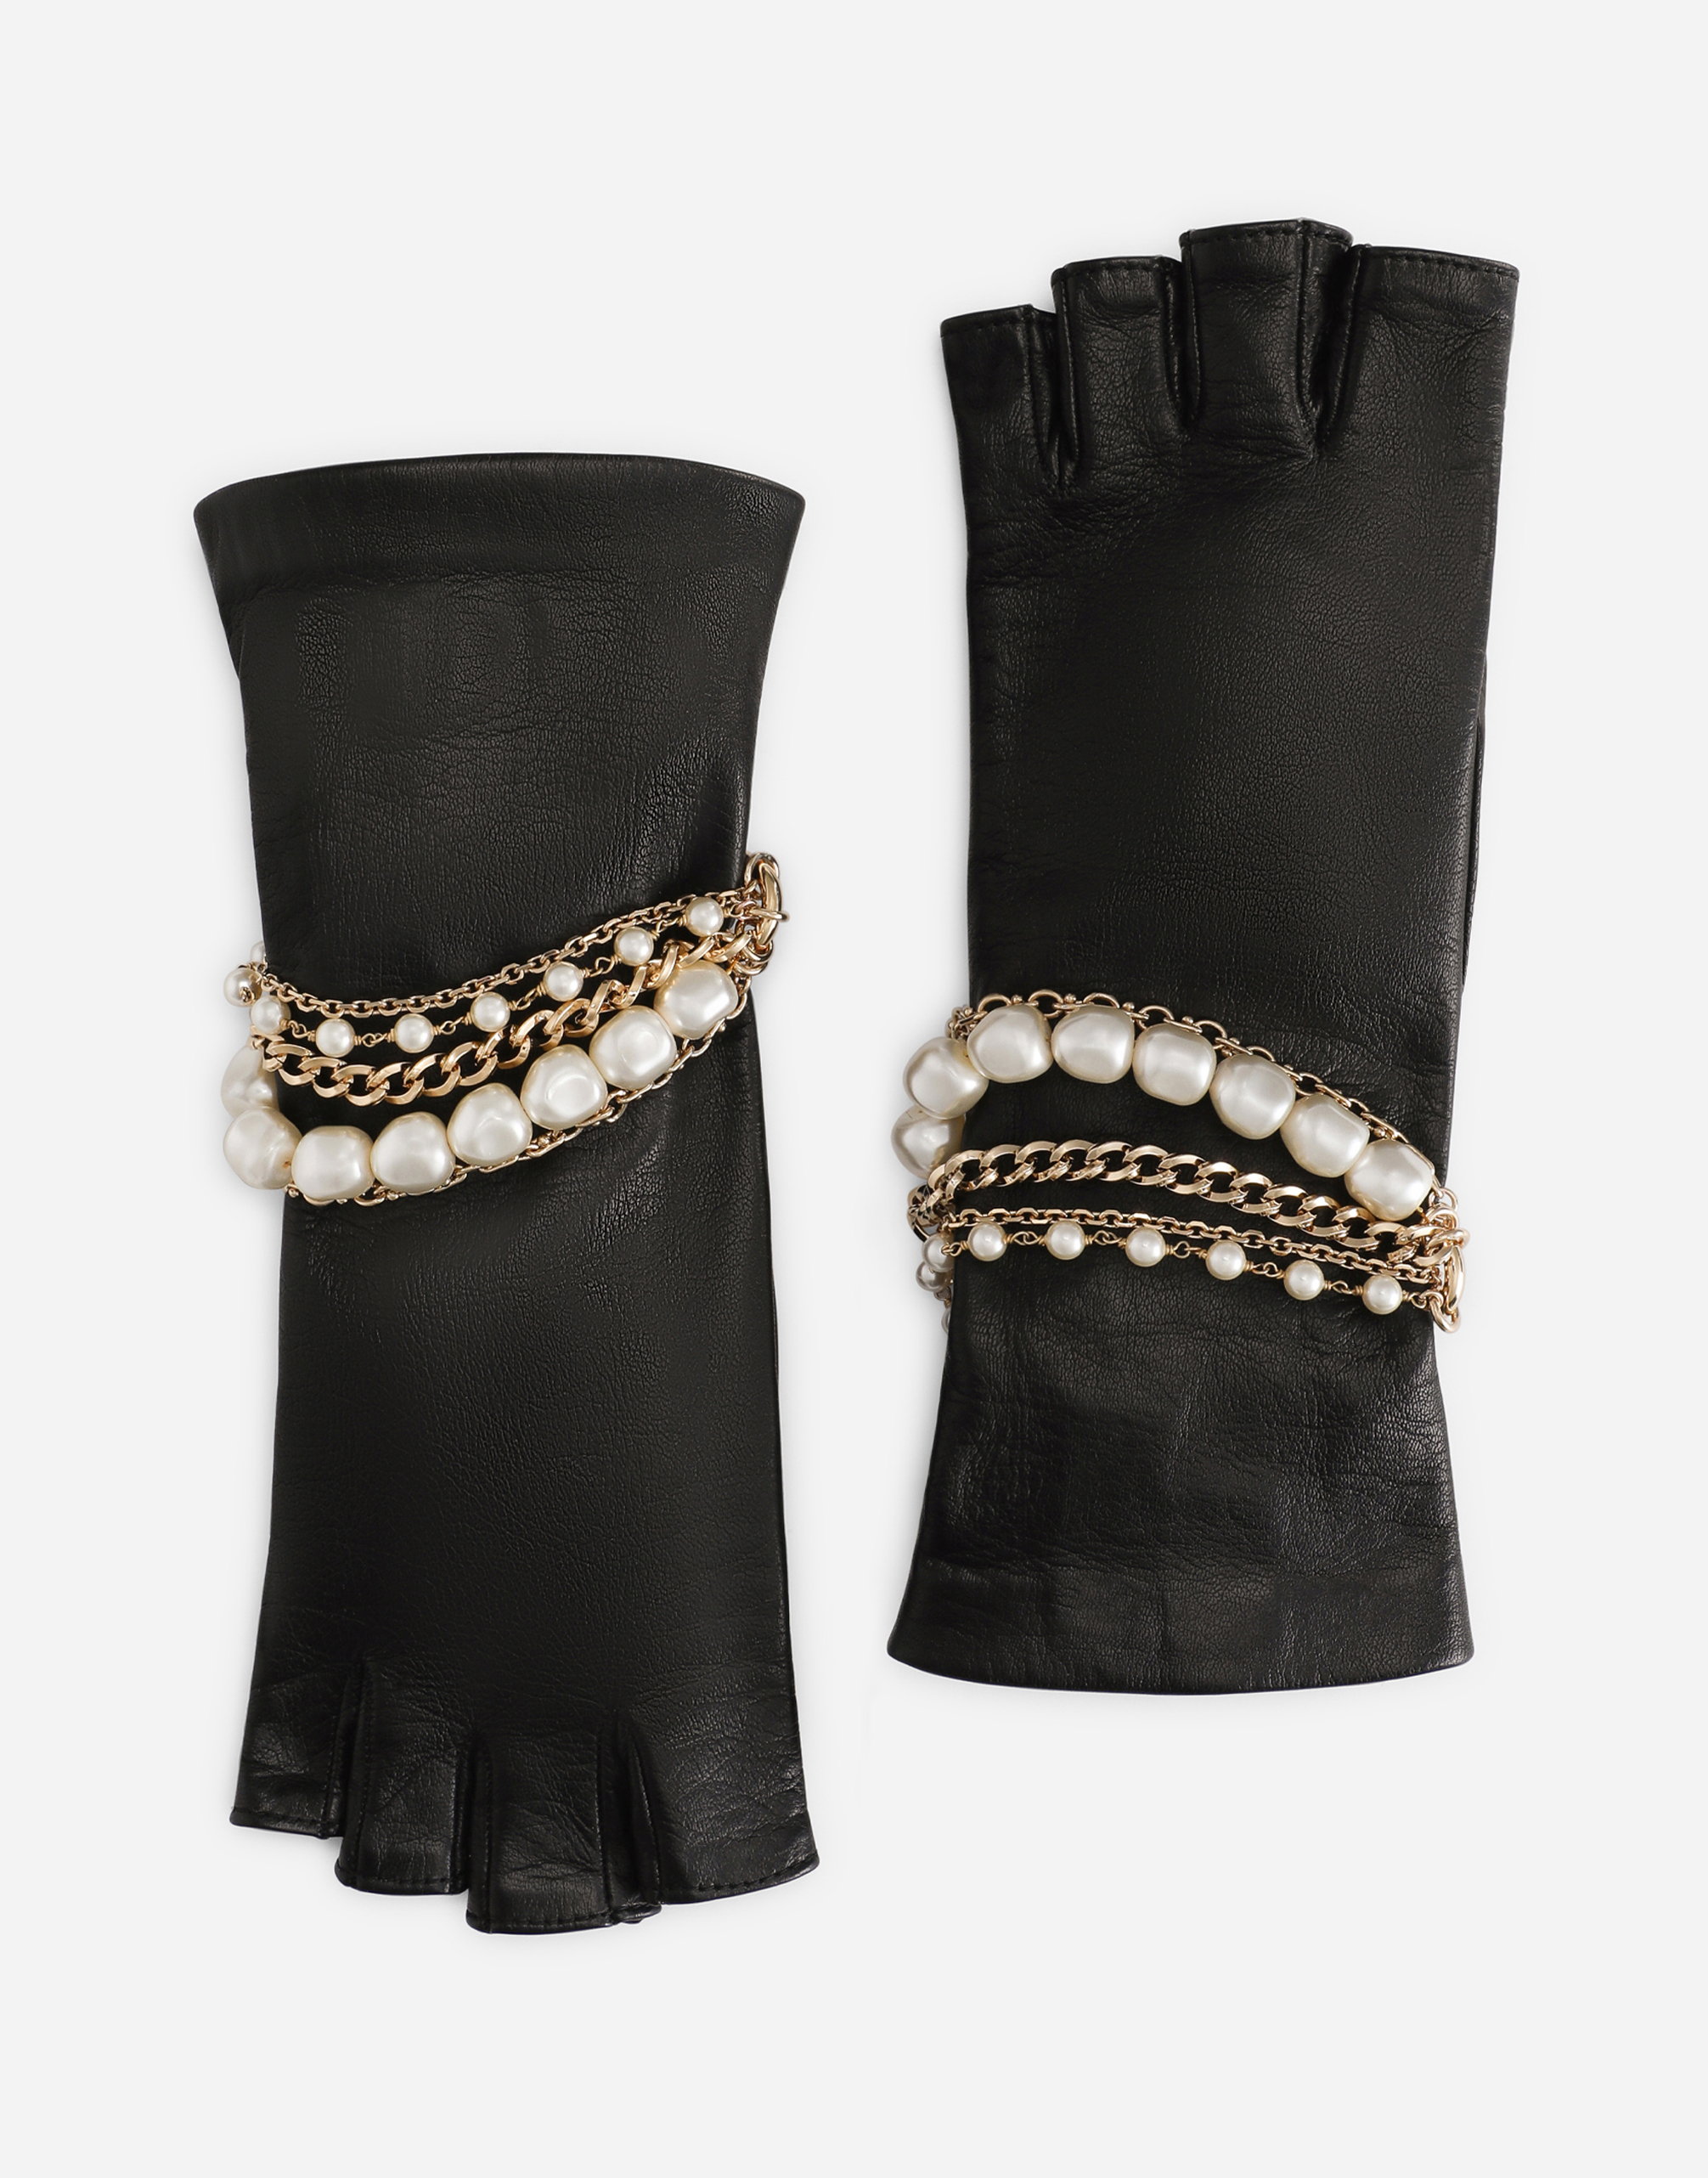 Nappa leather gloves with bejeweled bracelet embellishment in Multicolor